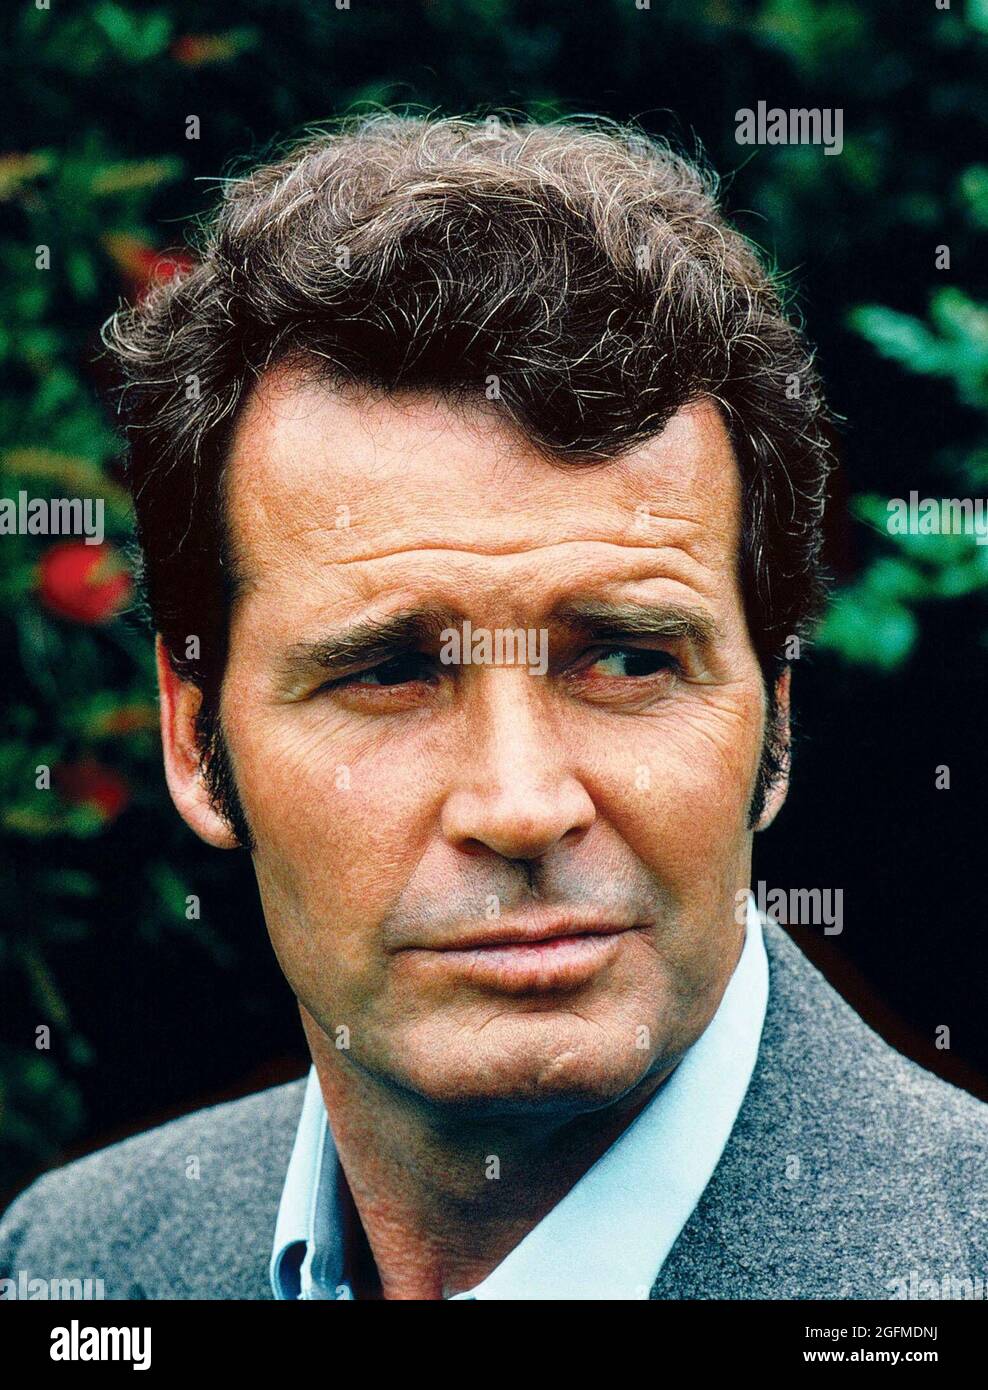 JAMES GARNER in THE ROCKFORD FILES (1974), directed by WILLIAM WIARD. Credit: ROY HUGGINS-PUBLIC ARTS PRODUCTIONS / Album Stock Photo